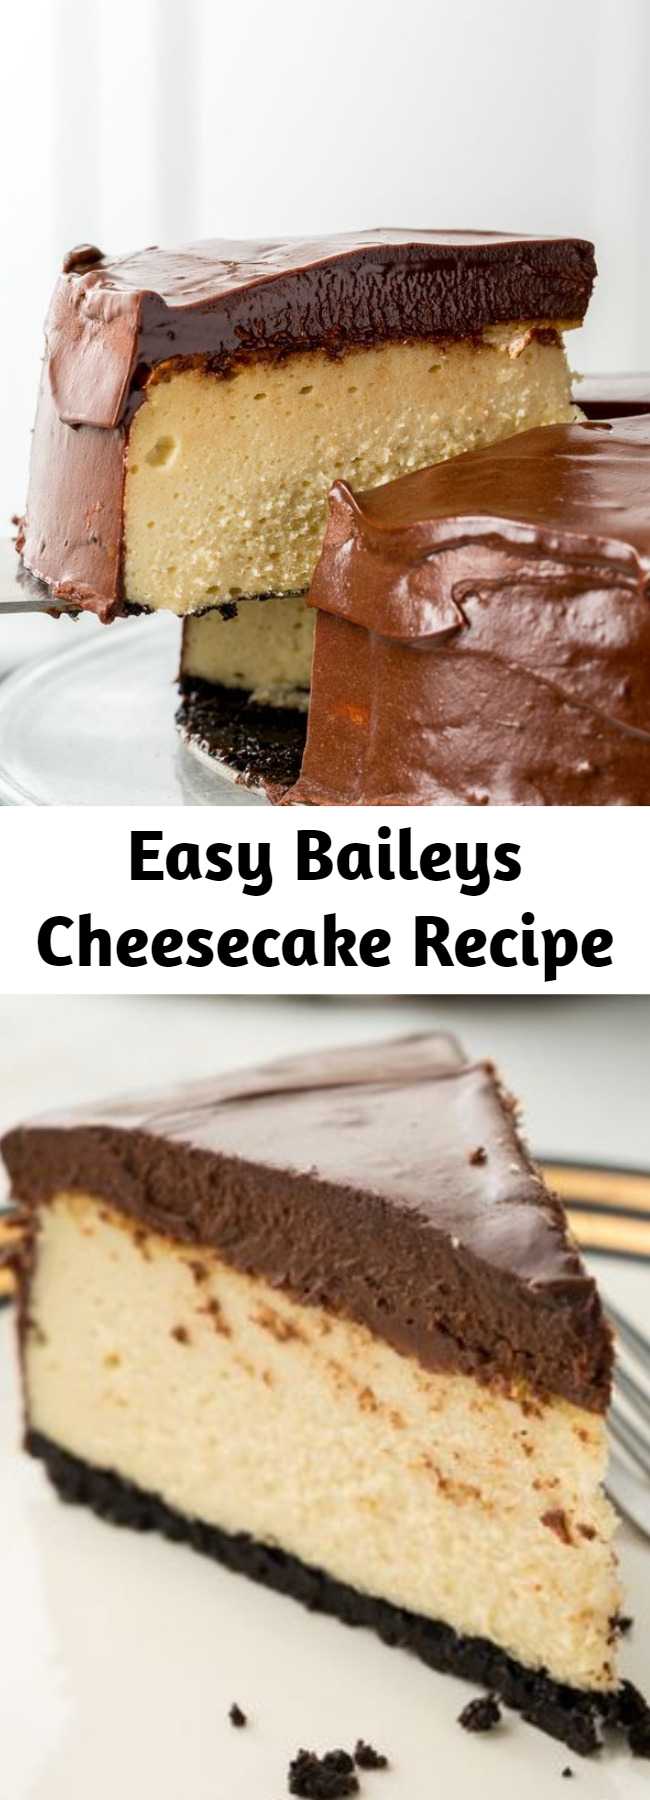 Easy Baileys Cheesecake Recipe -  Looking for the perfect Baileys cheesecake recipe? This Baileys Cheesecake is the best.